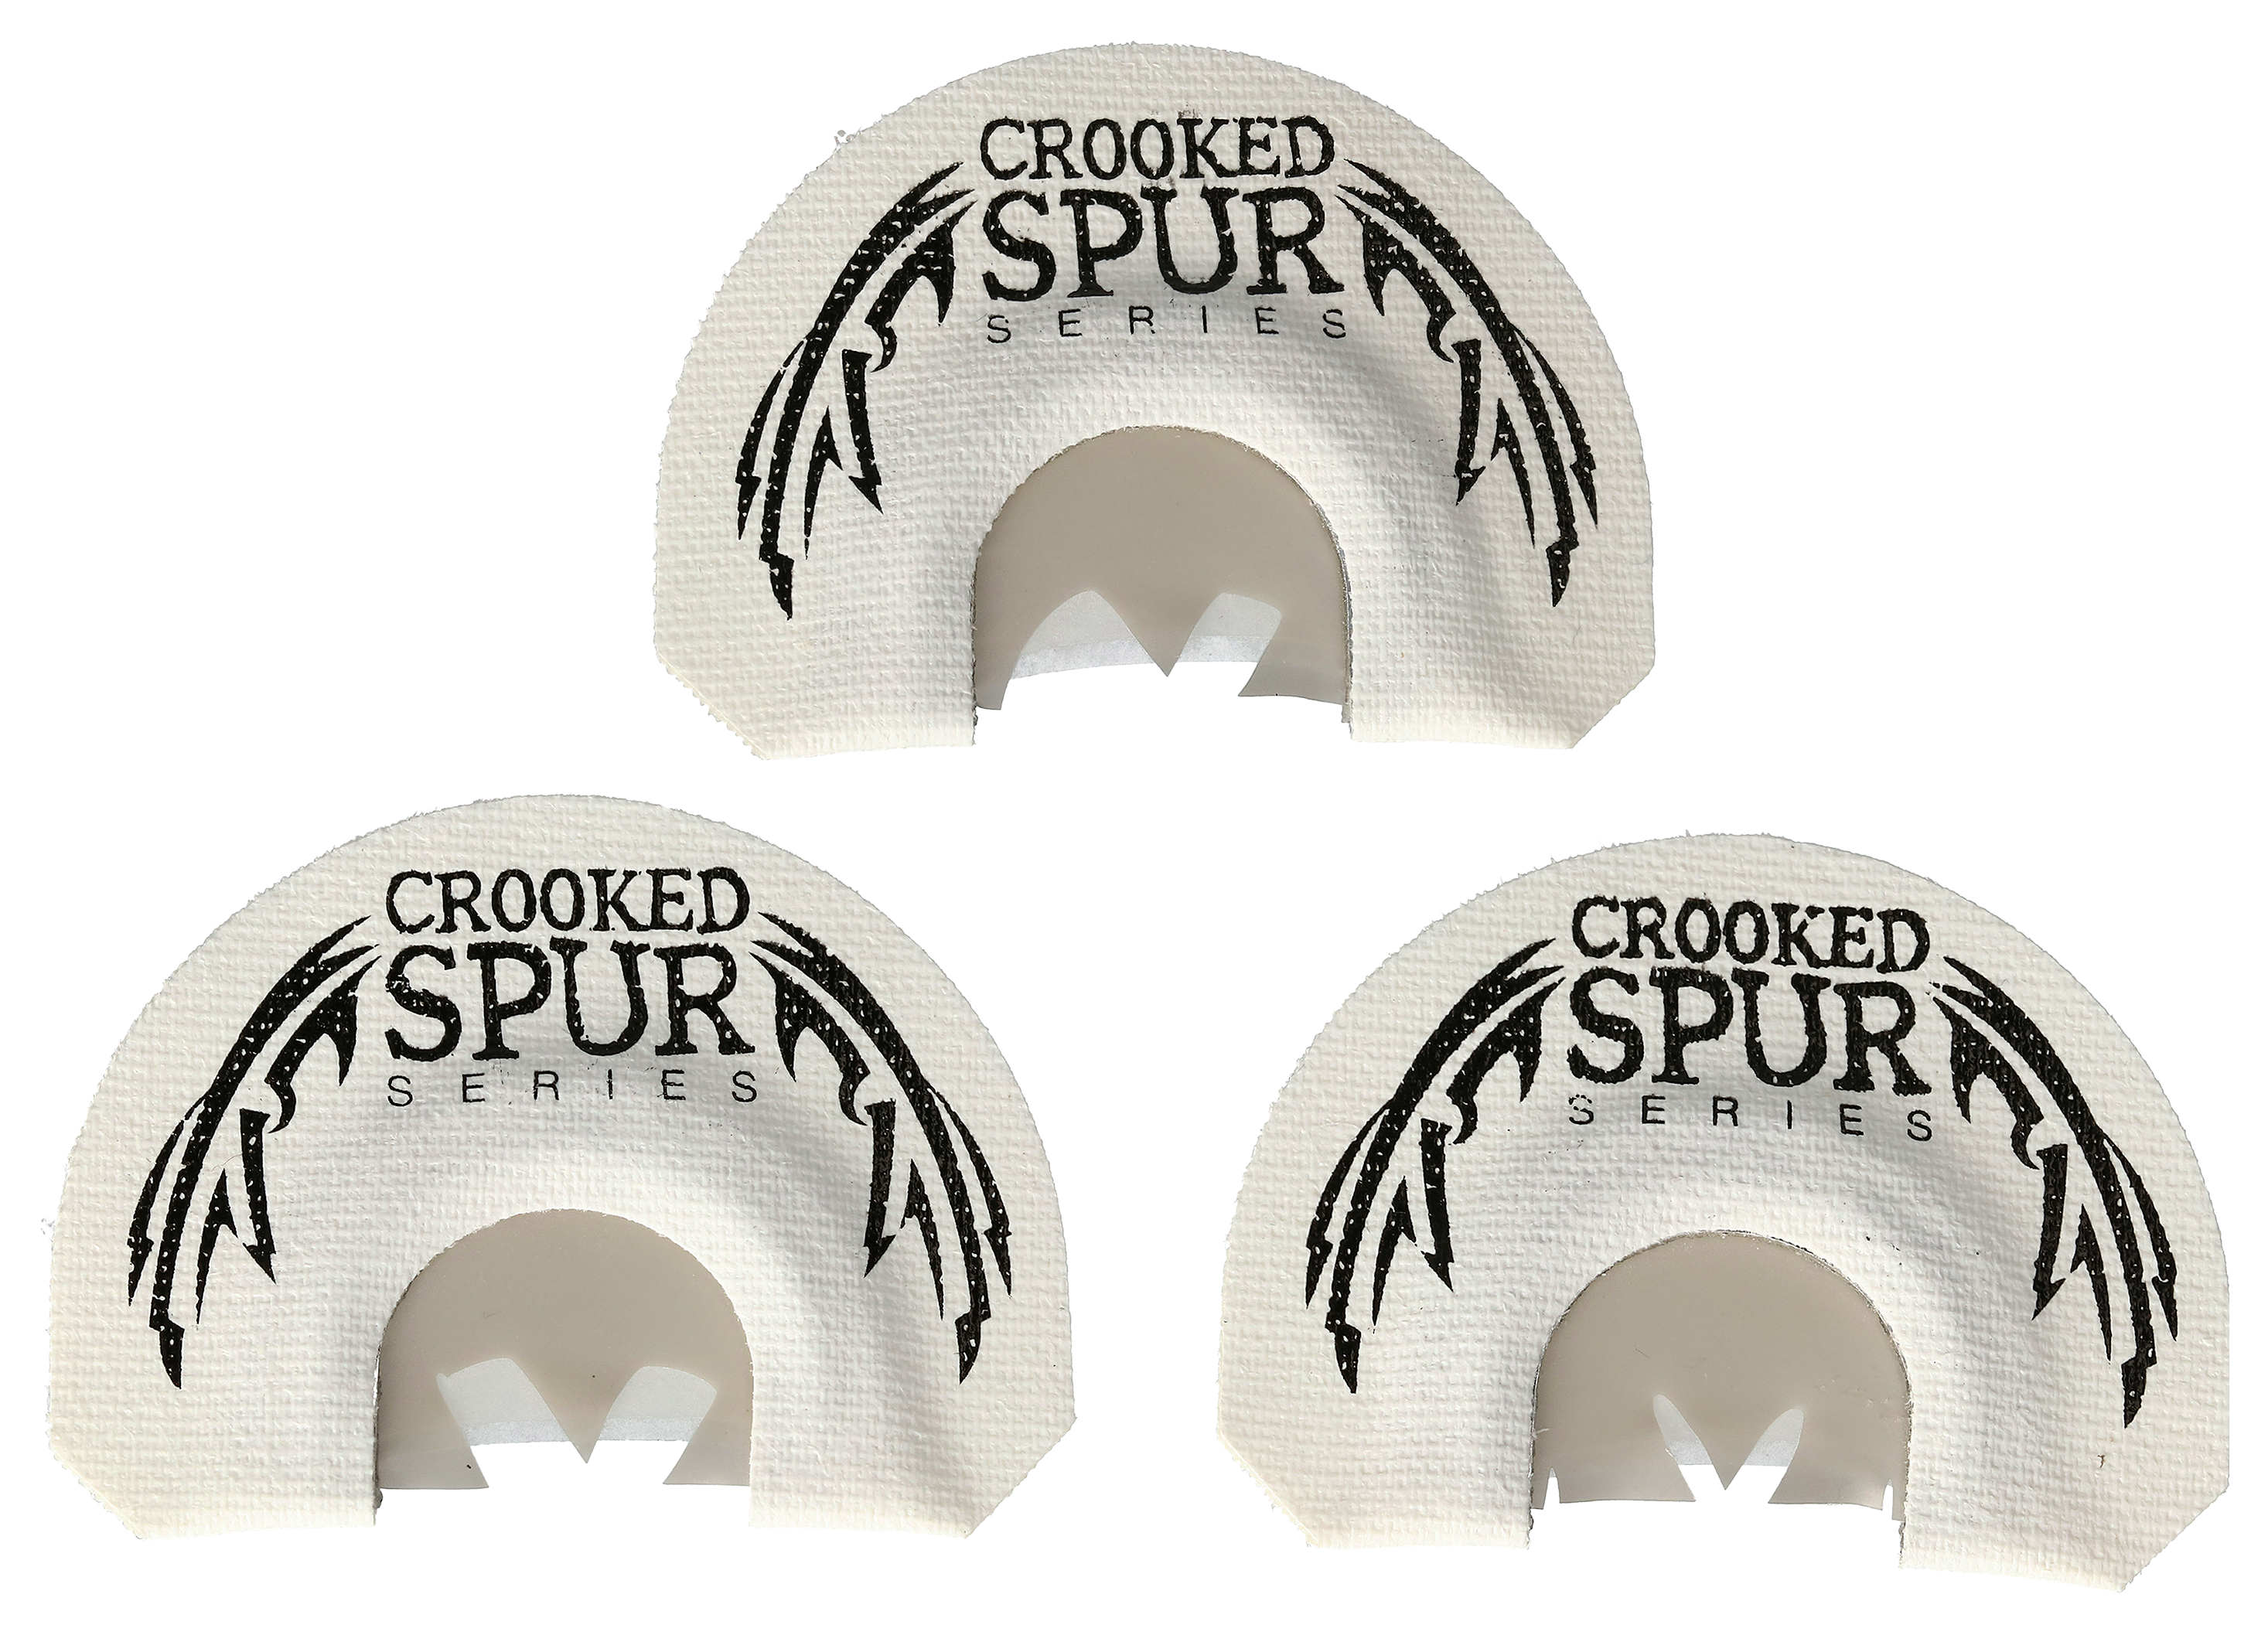 FOXPRO Crooked Spur Series Ghost Spur Mouth Turkey Call 3 Pack